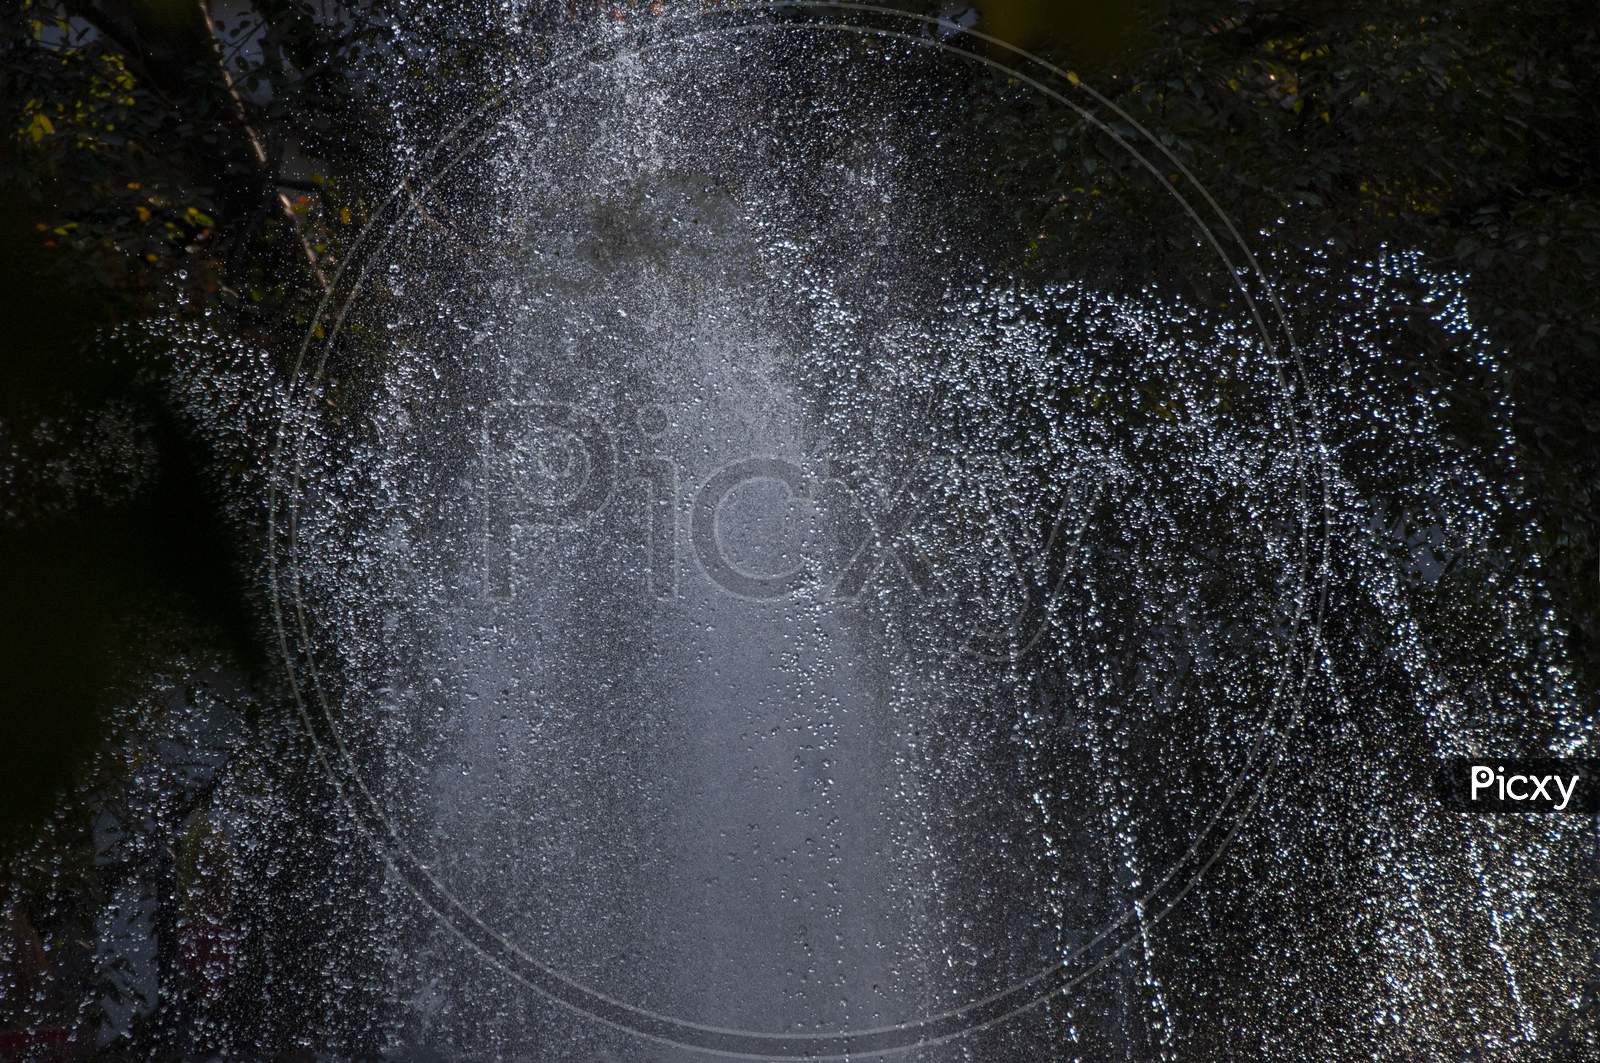 A Water Fountain In Action In The Evening